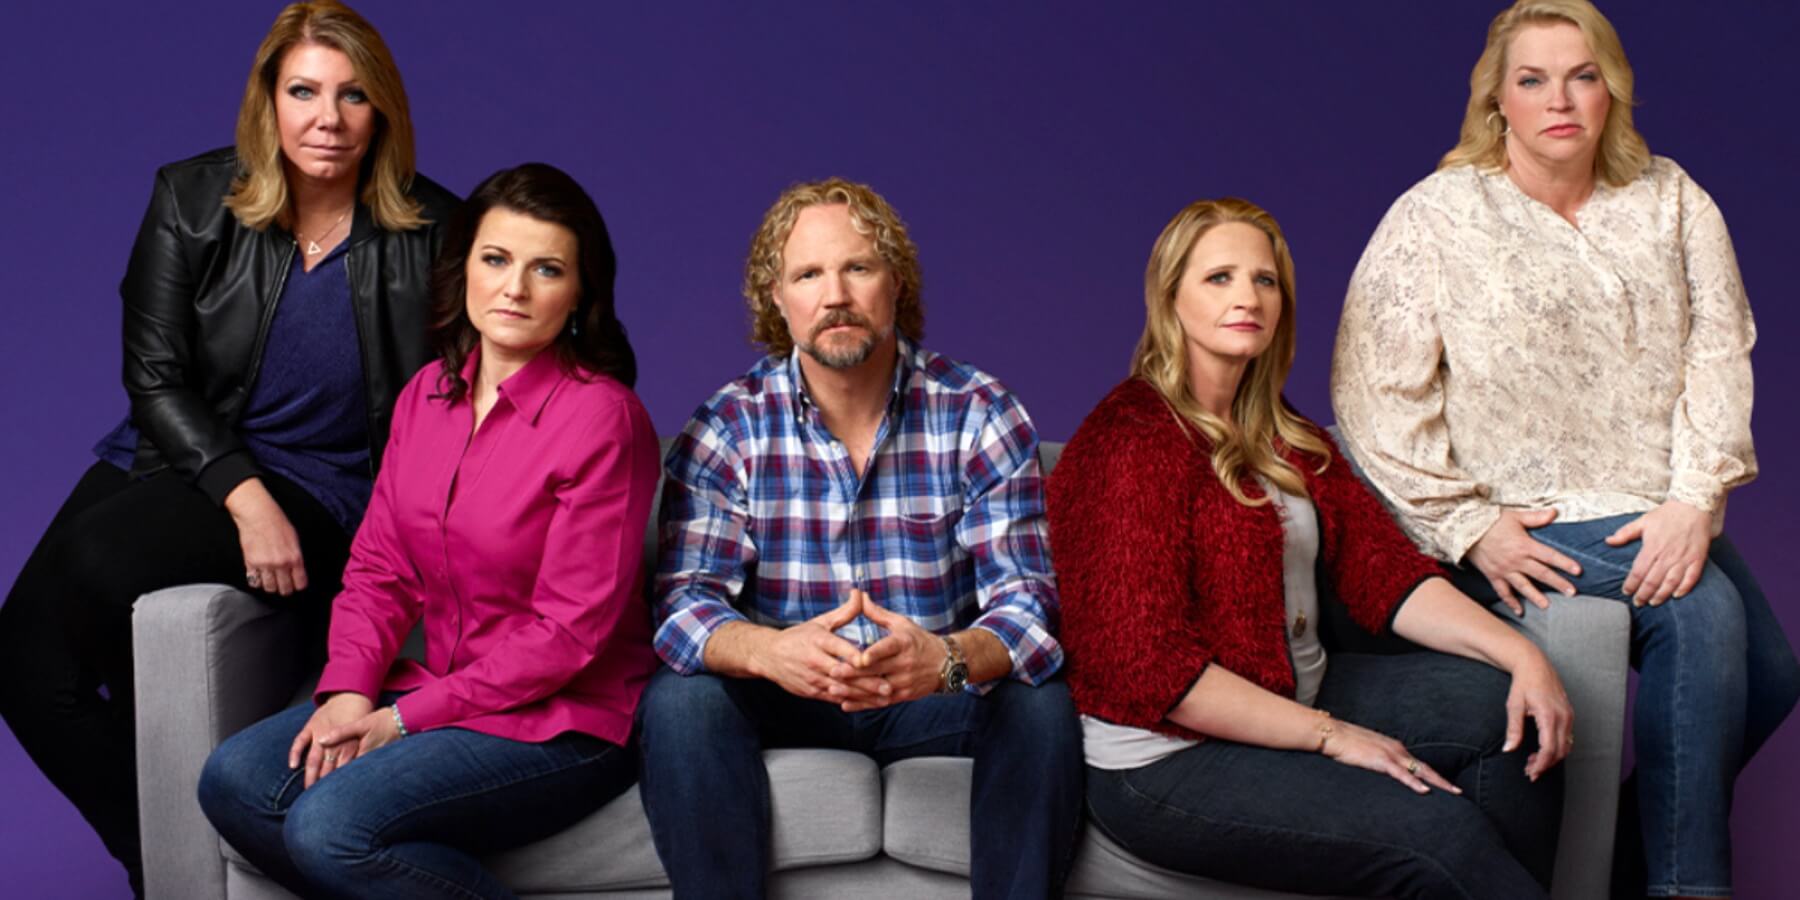 Meri, Robyn, Kody, Christine, and Janelle Brown of TLC's 'Sister Wives'